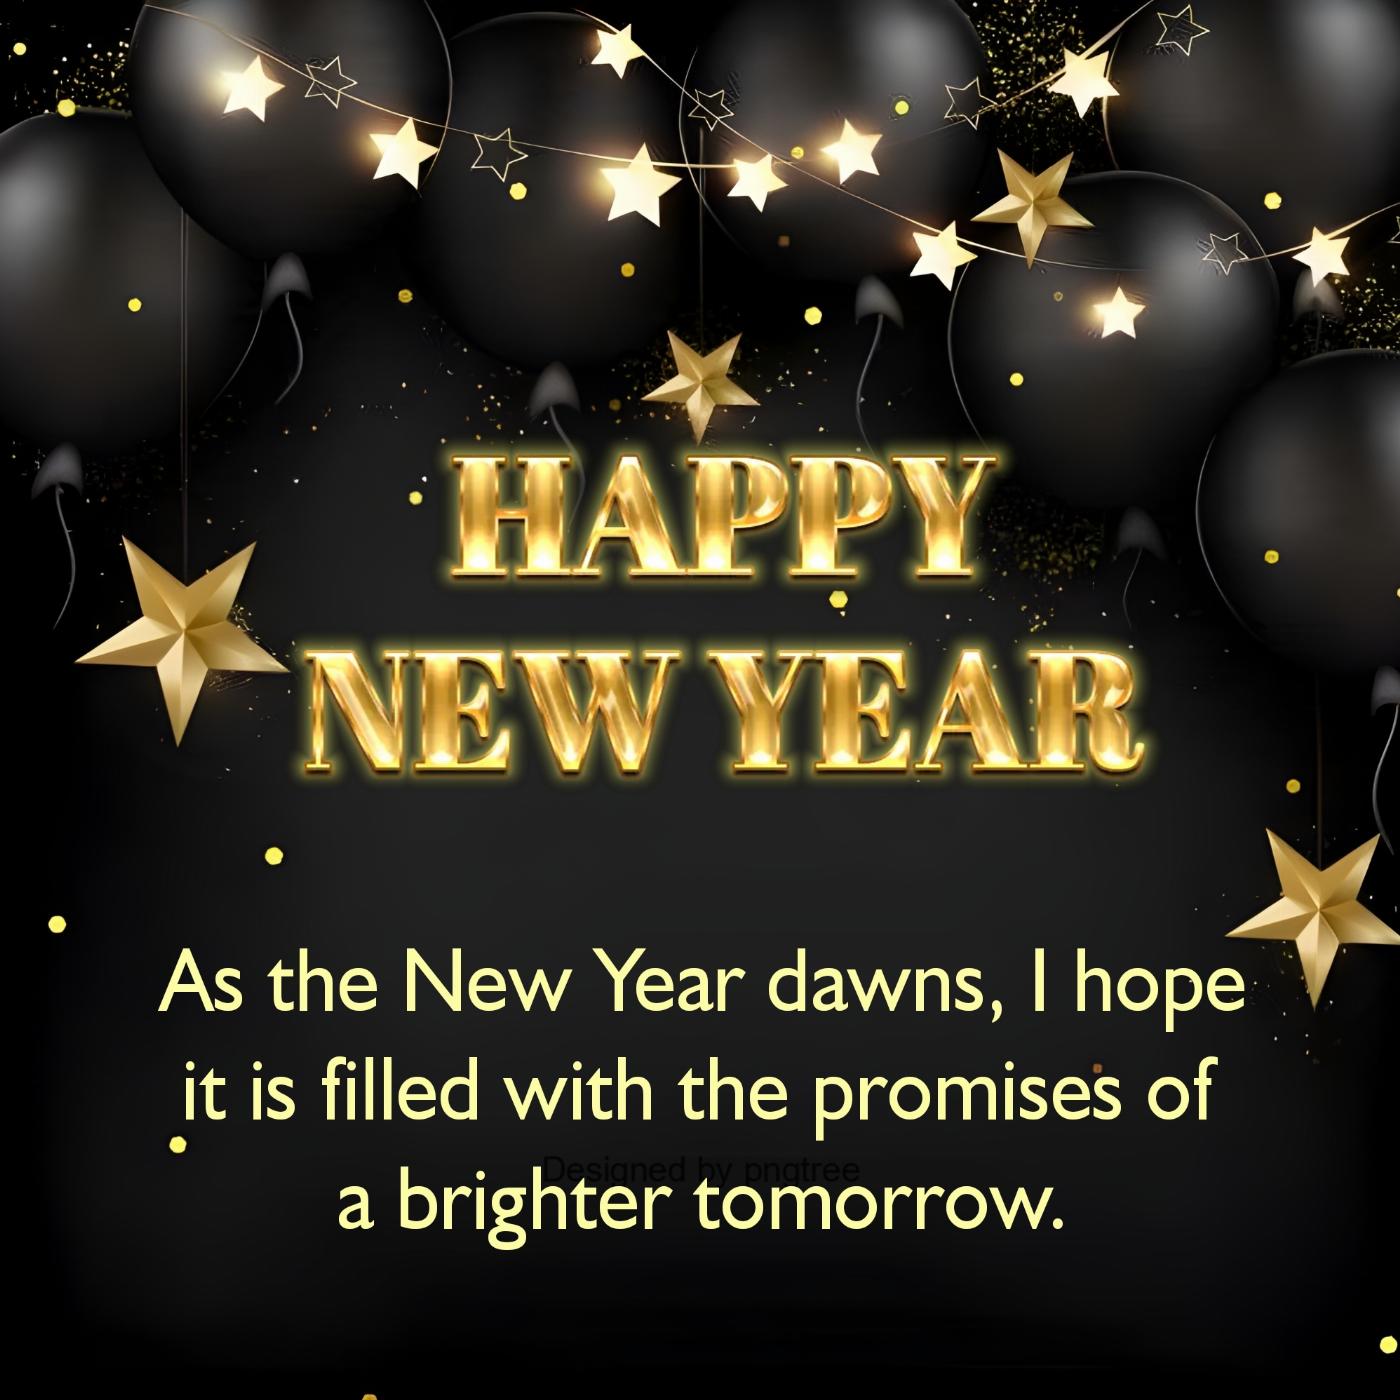 As the New Year dawns I hope it is filled with the promises